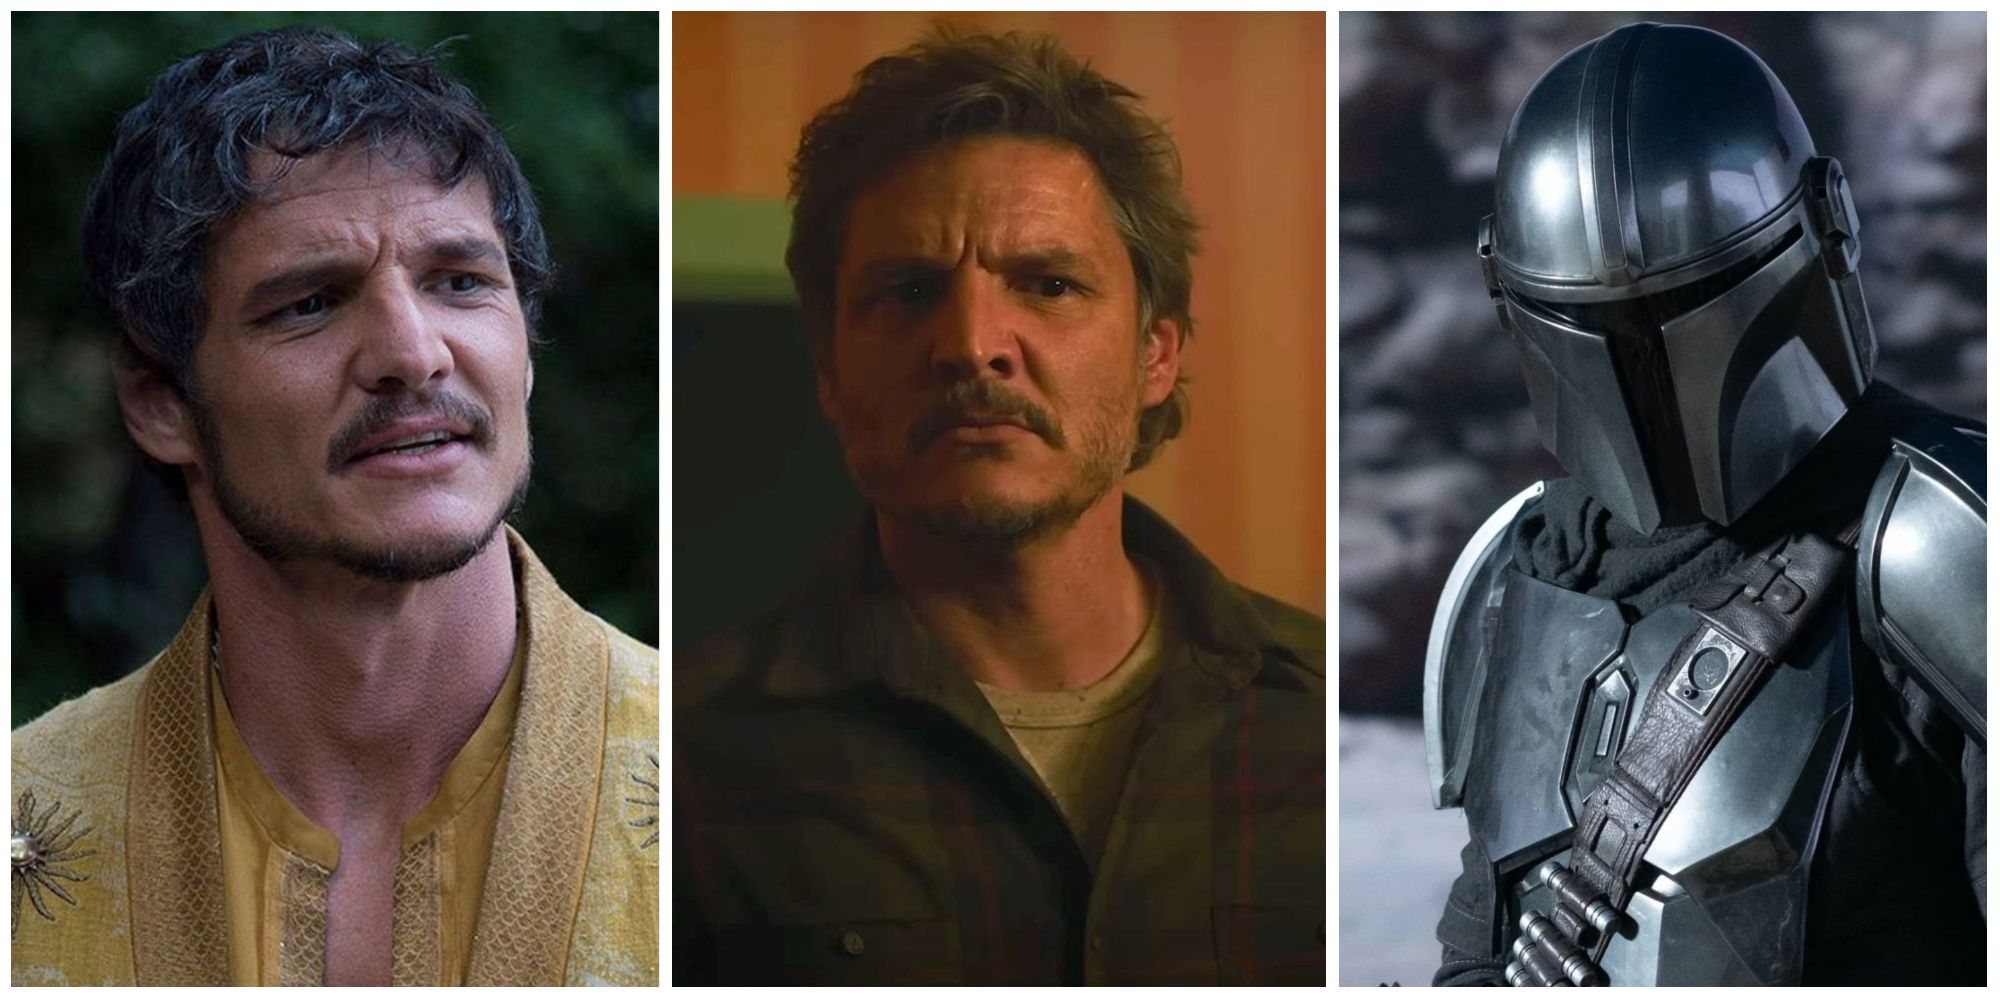 Pedro Pascal in Game of Thrones, The Last of Us, and The Mandalorian